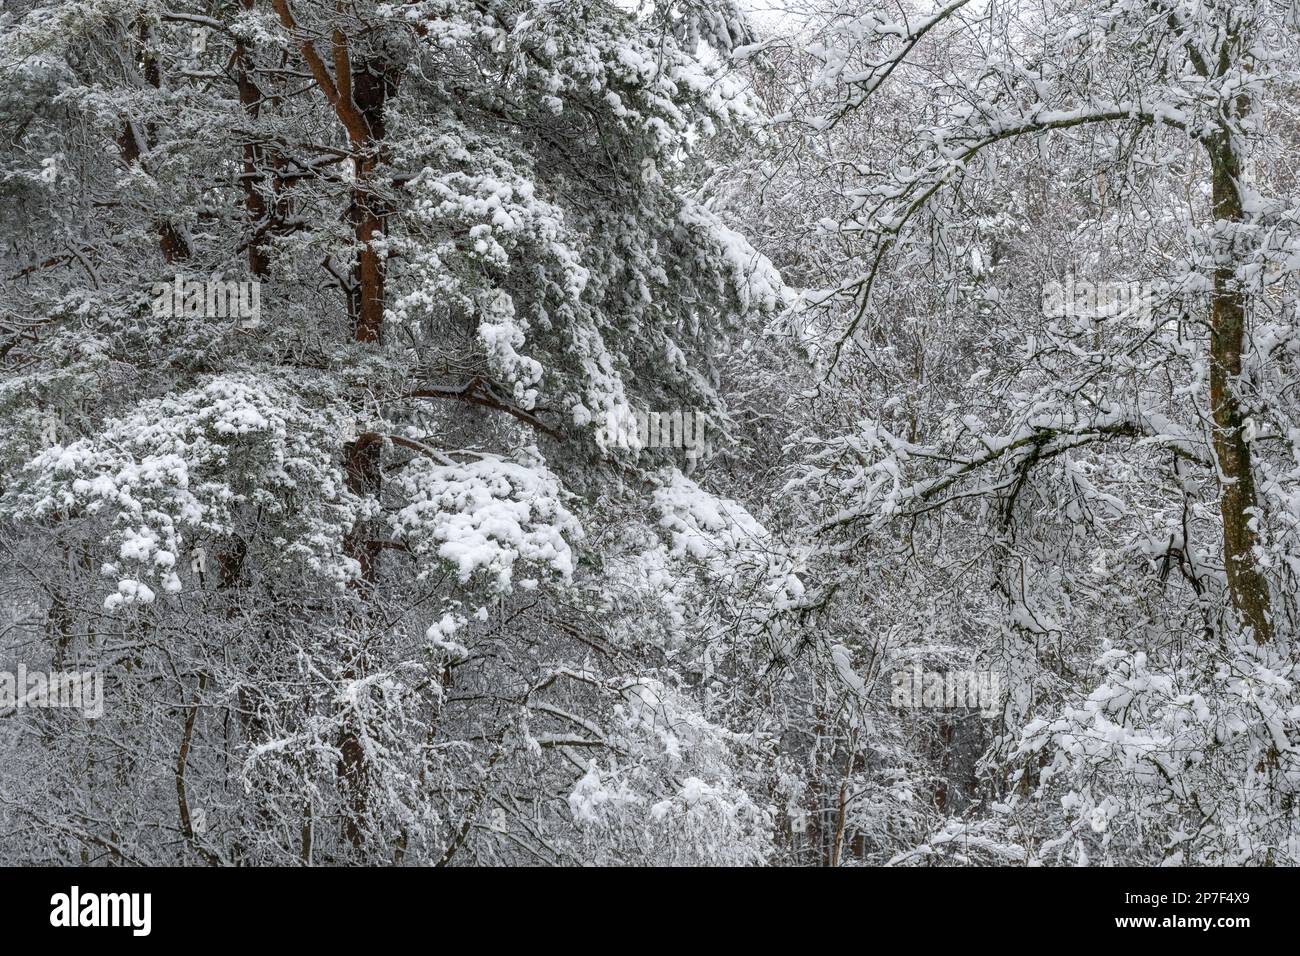 Snow scene in forest or woodland at Caesar's Camp, Hampshire, England, UK, 8th March 2023. Snowy countryside landscape. Stock Photo